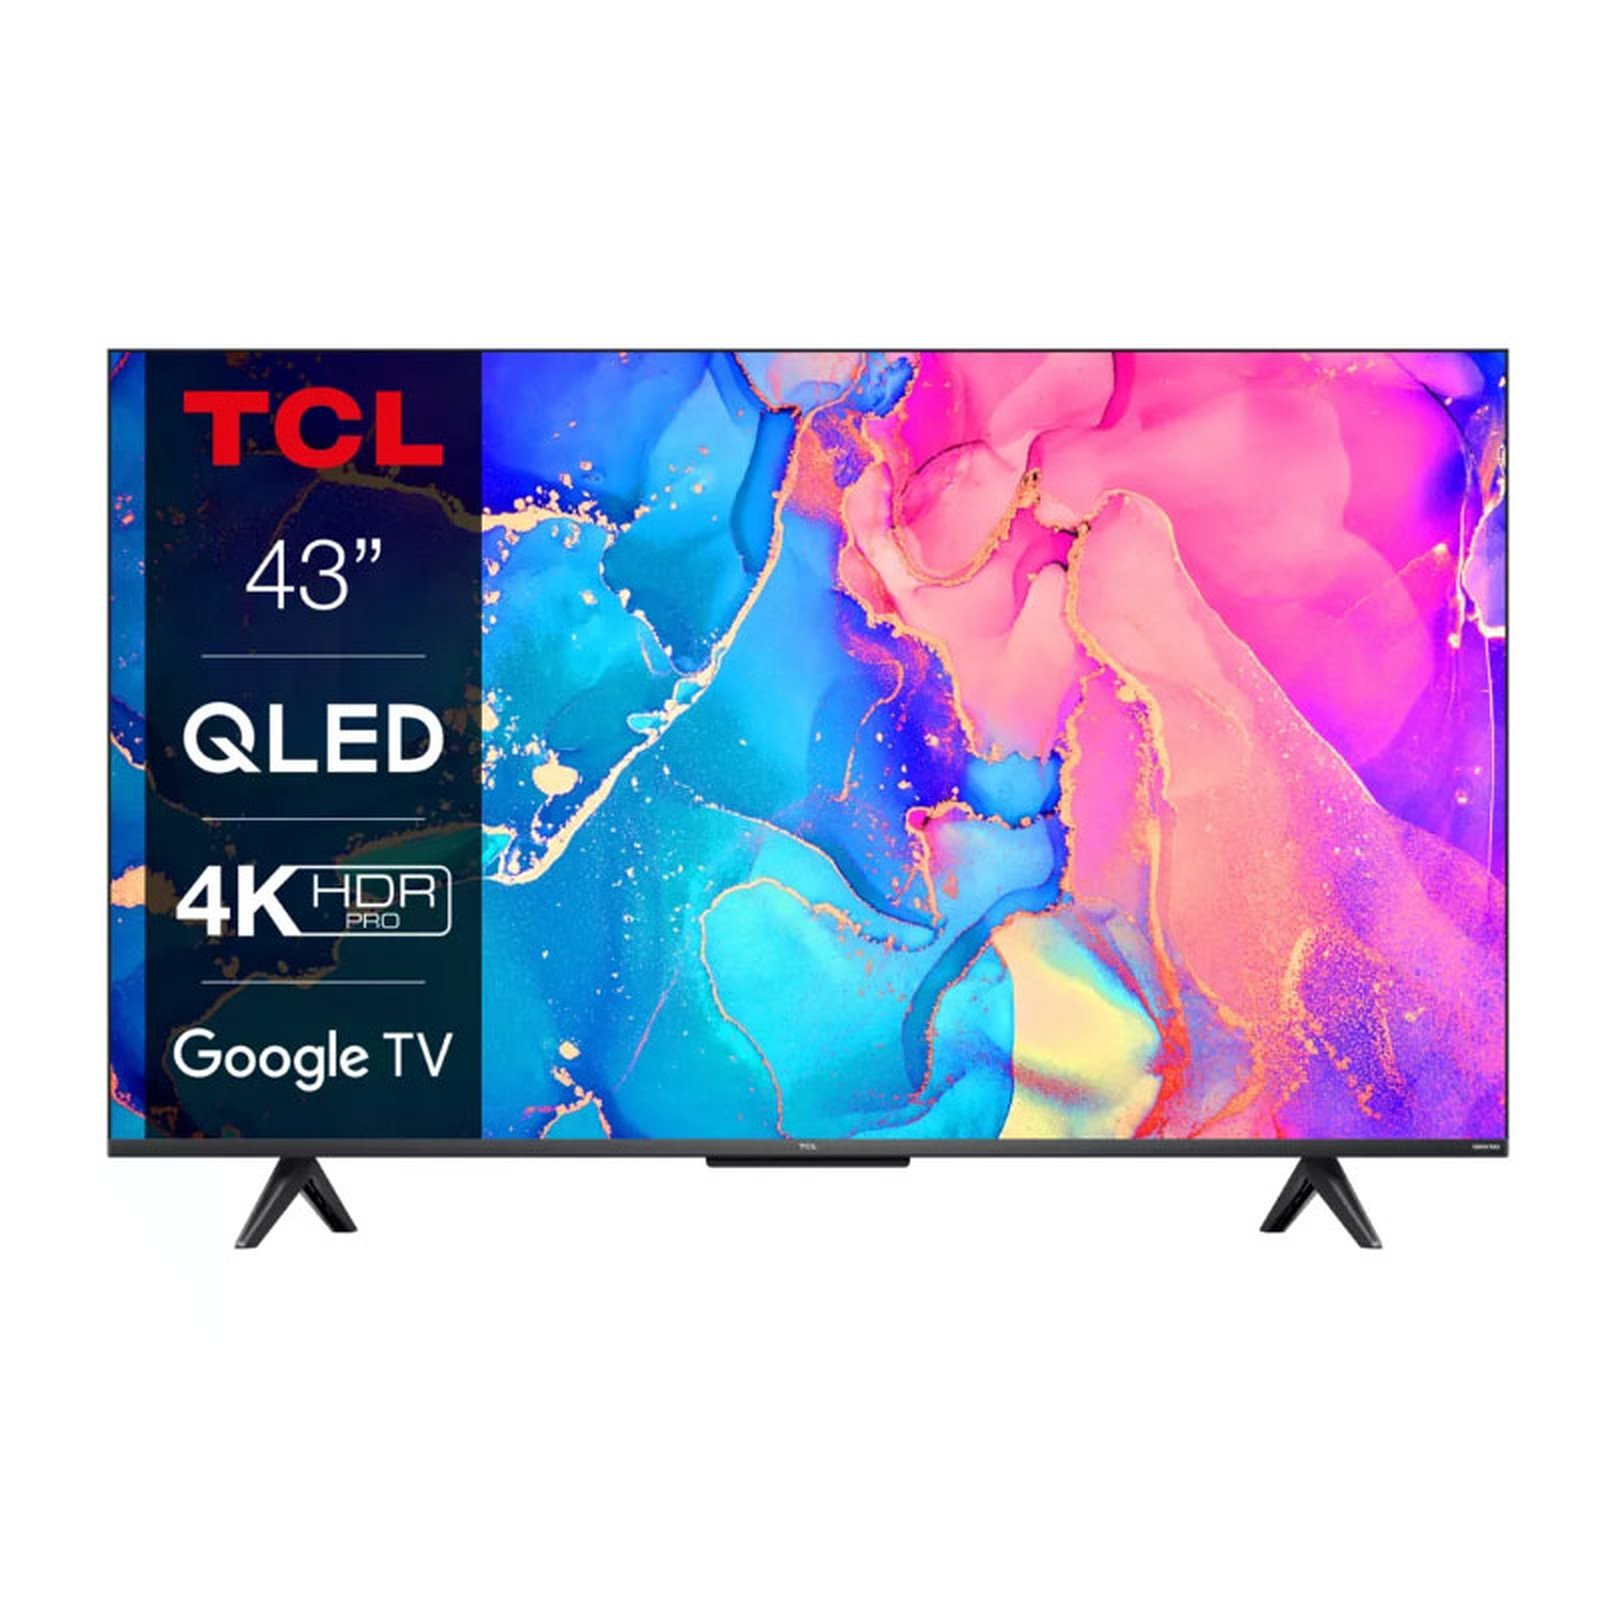 TCL 43C635